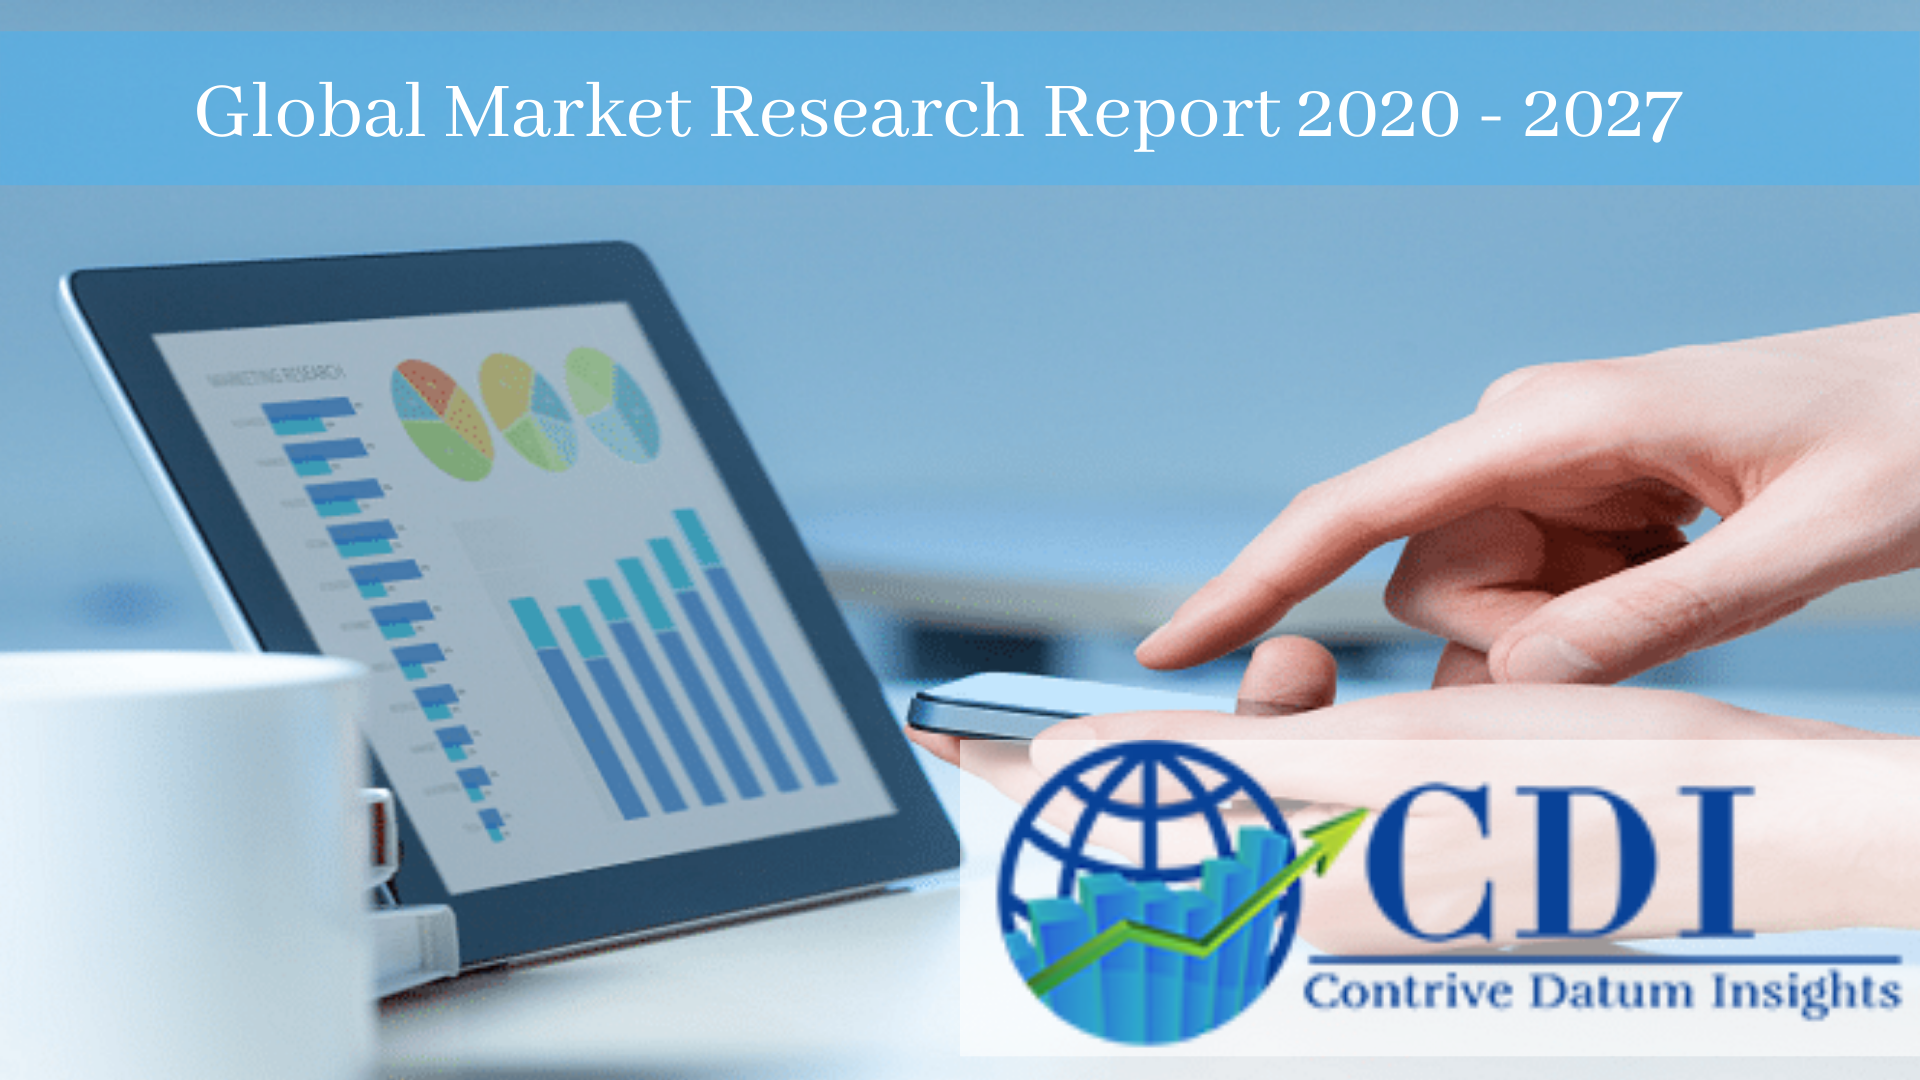 Nuclear Air Fitration Market Enhancement, Latest Trends, Growth and Opportunity during 2020 to 2027 | Camfill Farr Air Filters, AAF International, Midwesco Filter Resources, Hollingsworth & Vose Company